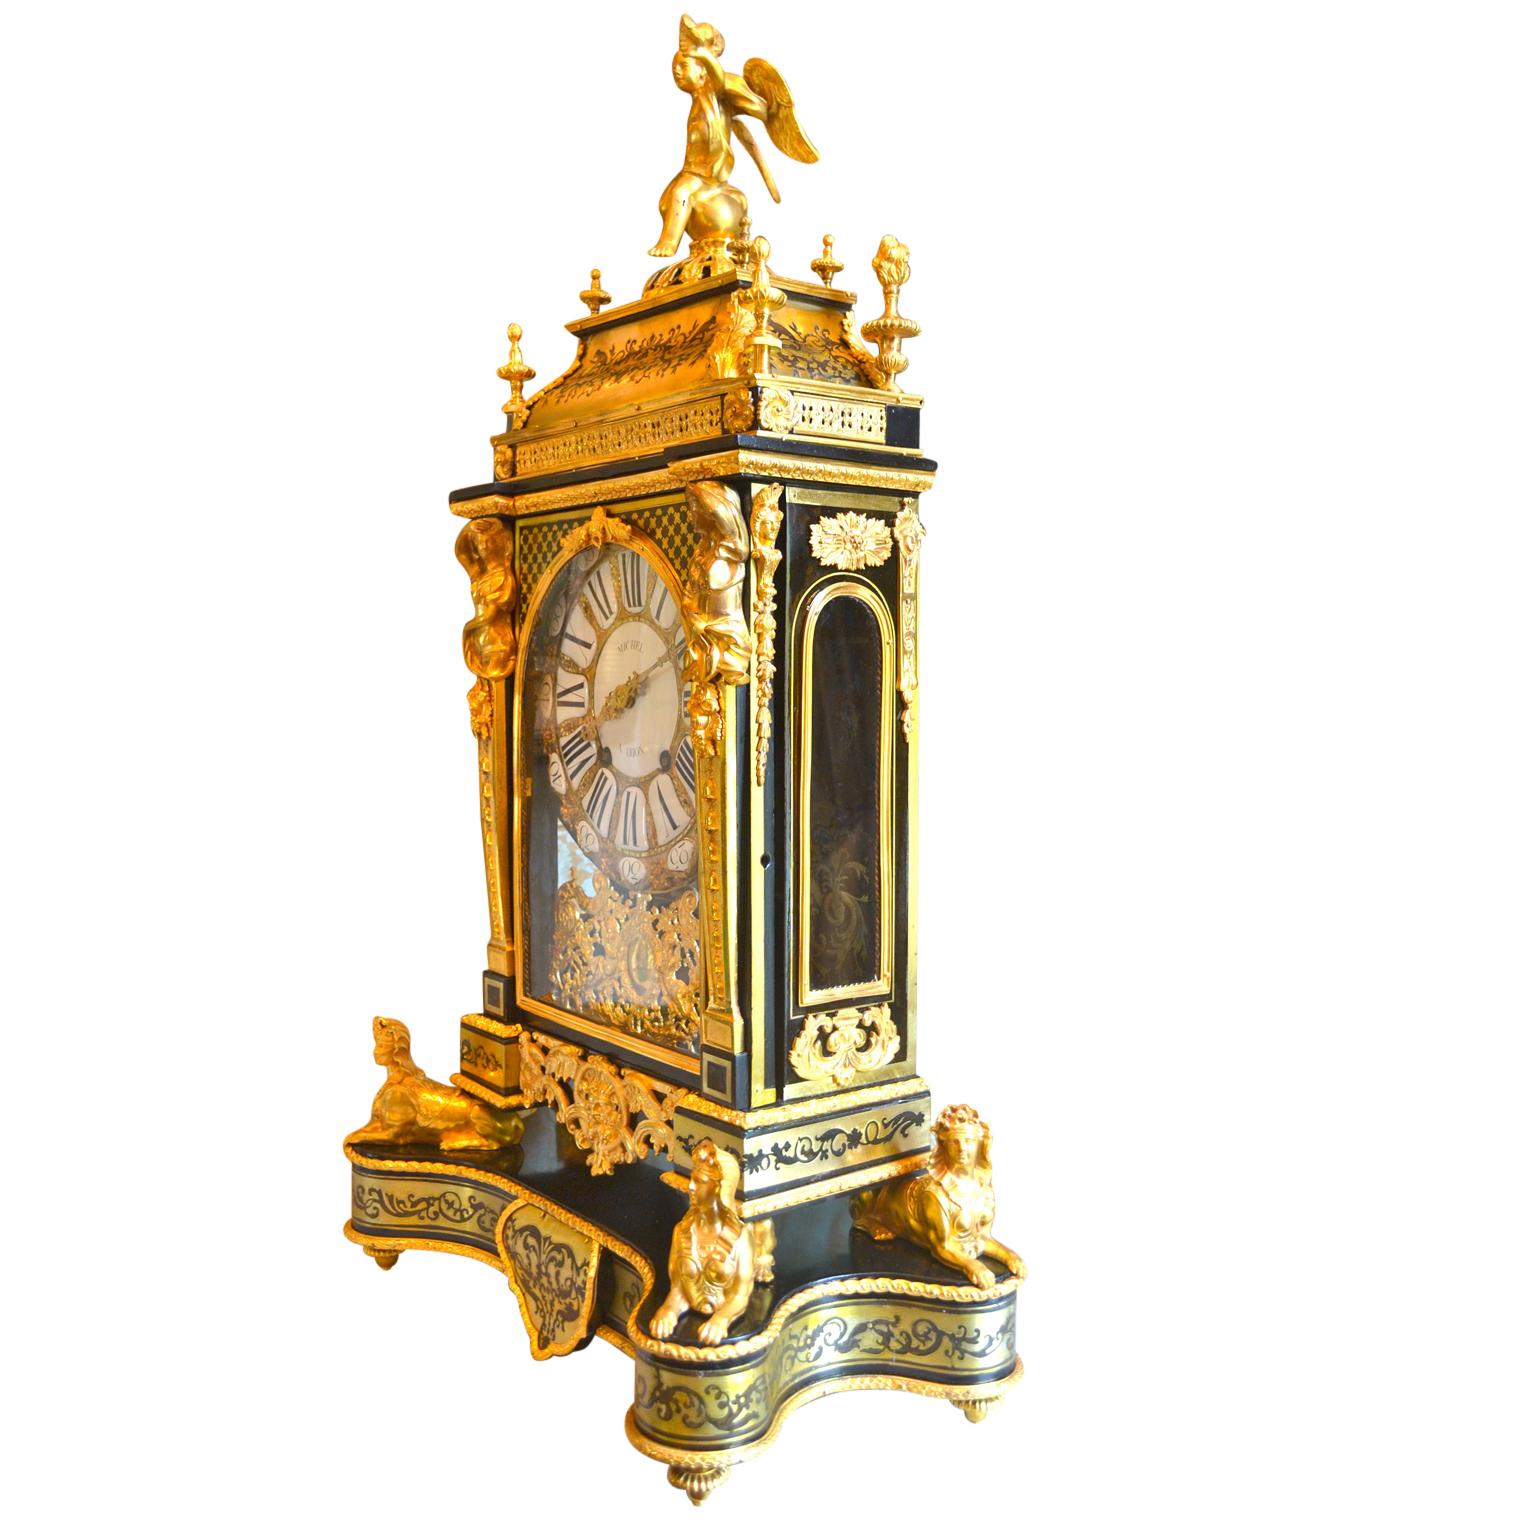 A magnificent, completely restored Louis XV bracket clock by Michel   a  Dijon, signed on the dial and the time/strike movement. A winged putto in partial drape seated upon the removable architectural top, with two bells concealed beneath. The